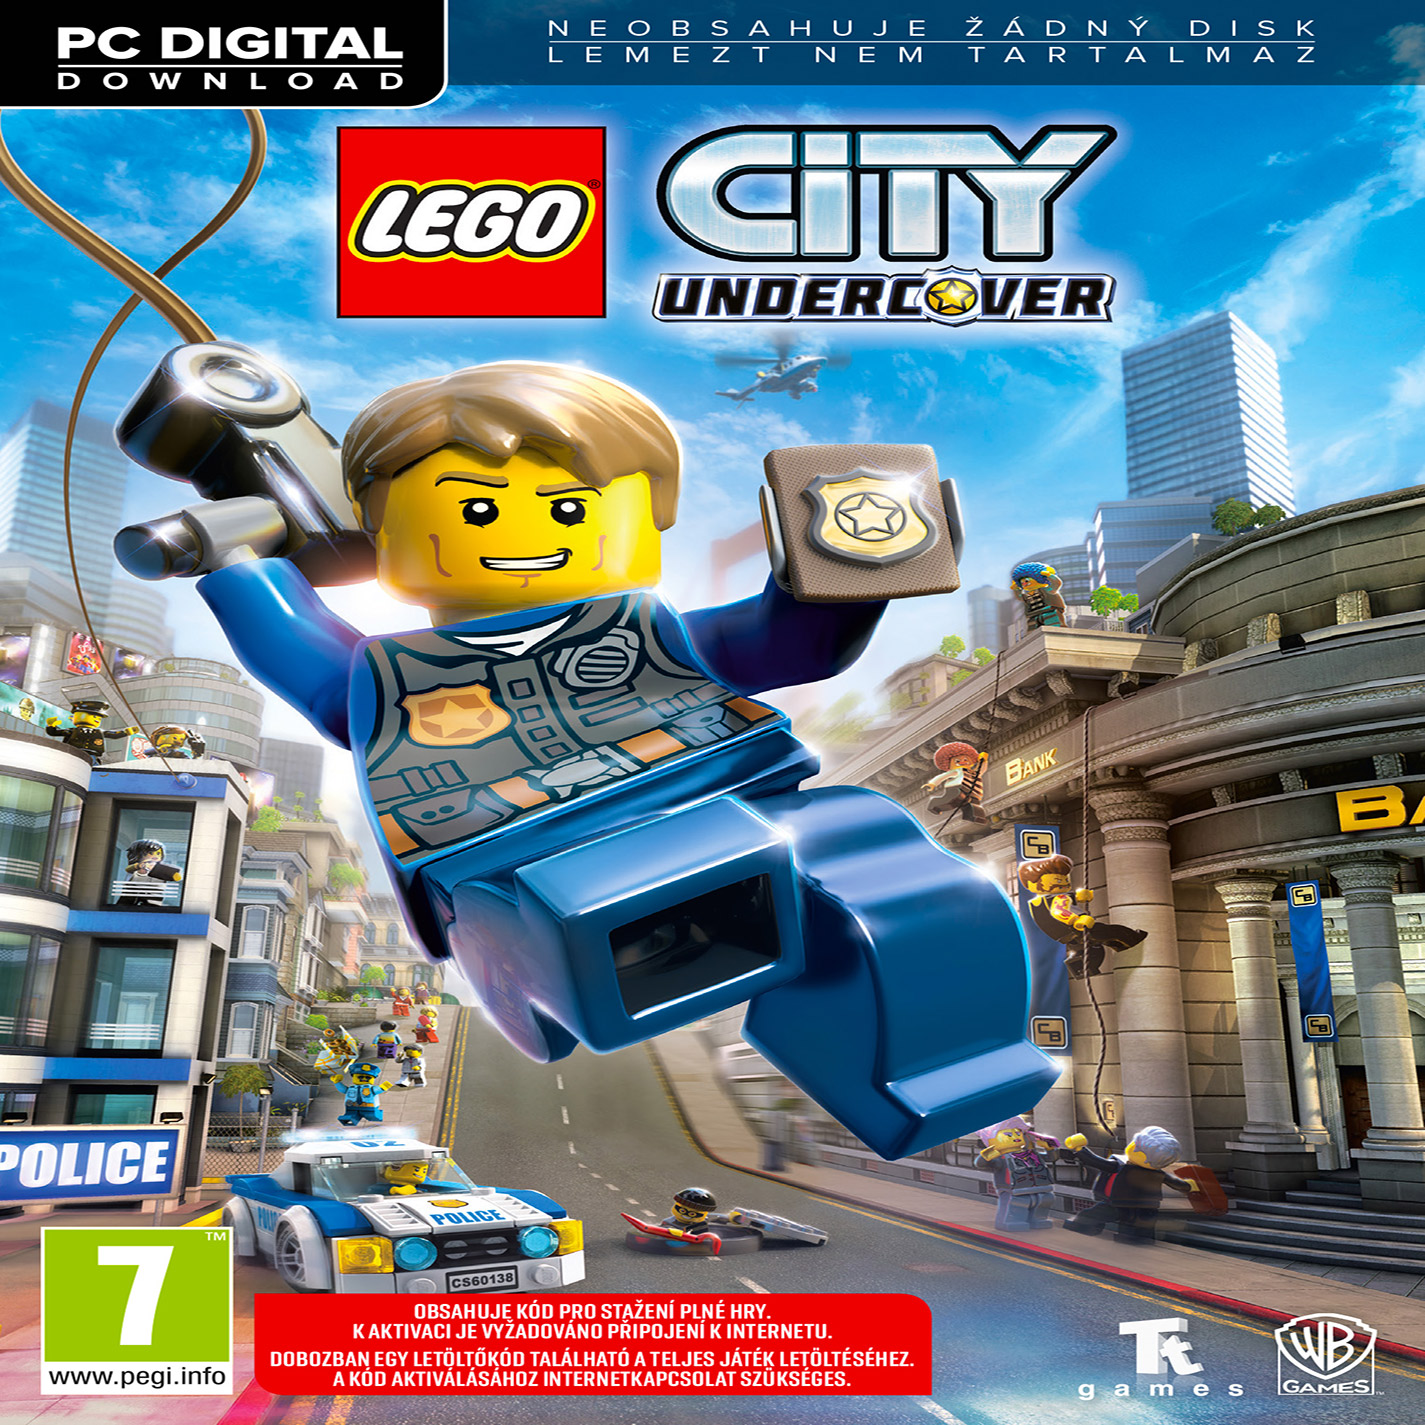 LEGO City Undercover - pedn CD obal